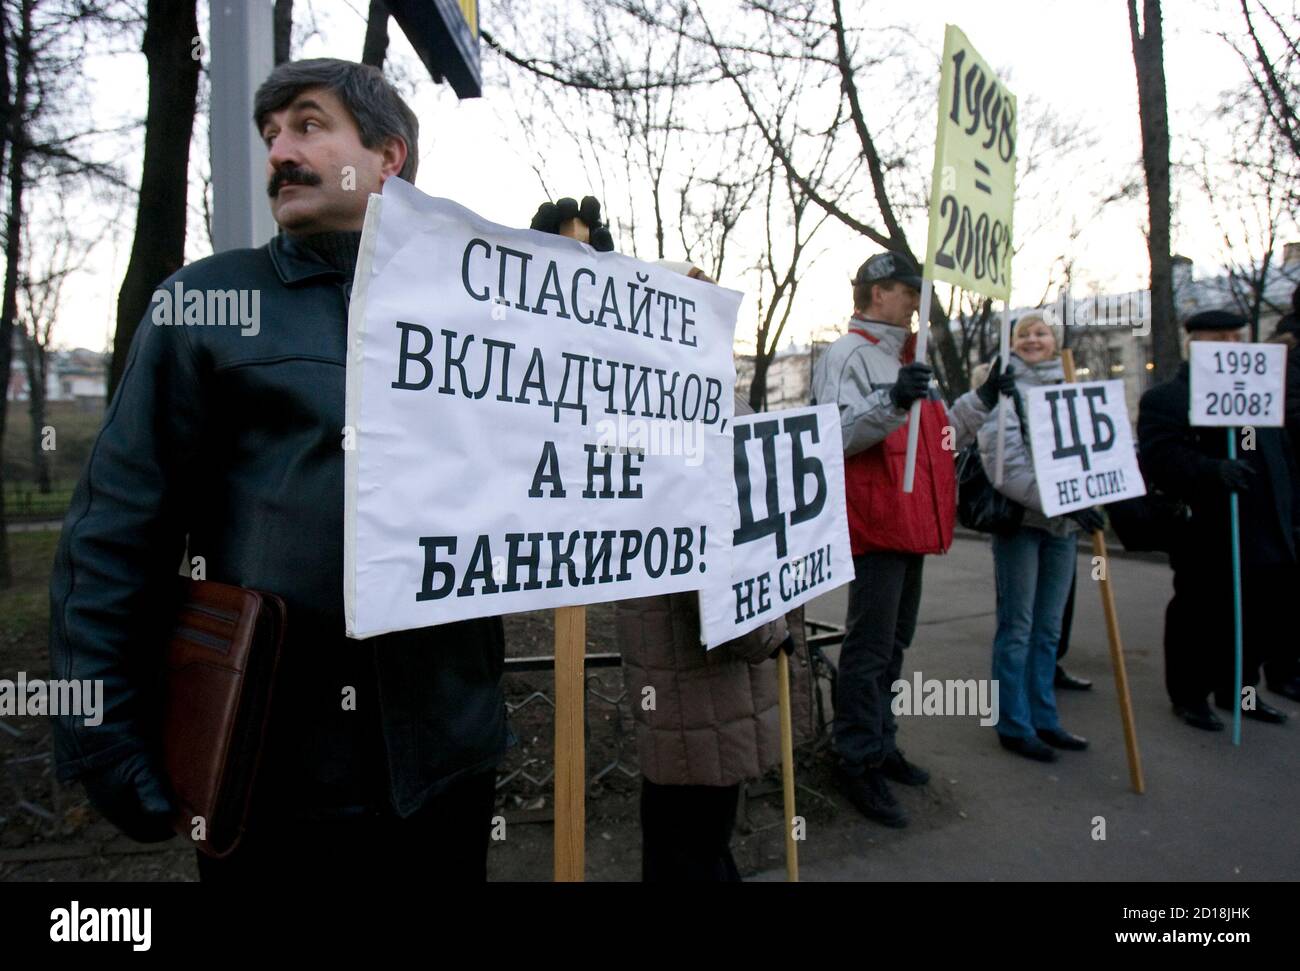 Investors of the bank Kapital Kredit stand with placards reading (L-R) 'Save Investors, Not Bankers', 'Central Bank, Wake Up!' and '1998 (Crisis) equals 2008' during a picket in front of the main building in Moscow, December 19, 2008. Bank investors gathered to claim their money from the bank.  REUTERS/Sergei Karpukhin  (RUSSIA) Stock Photo